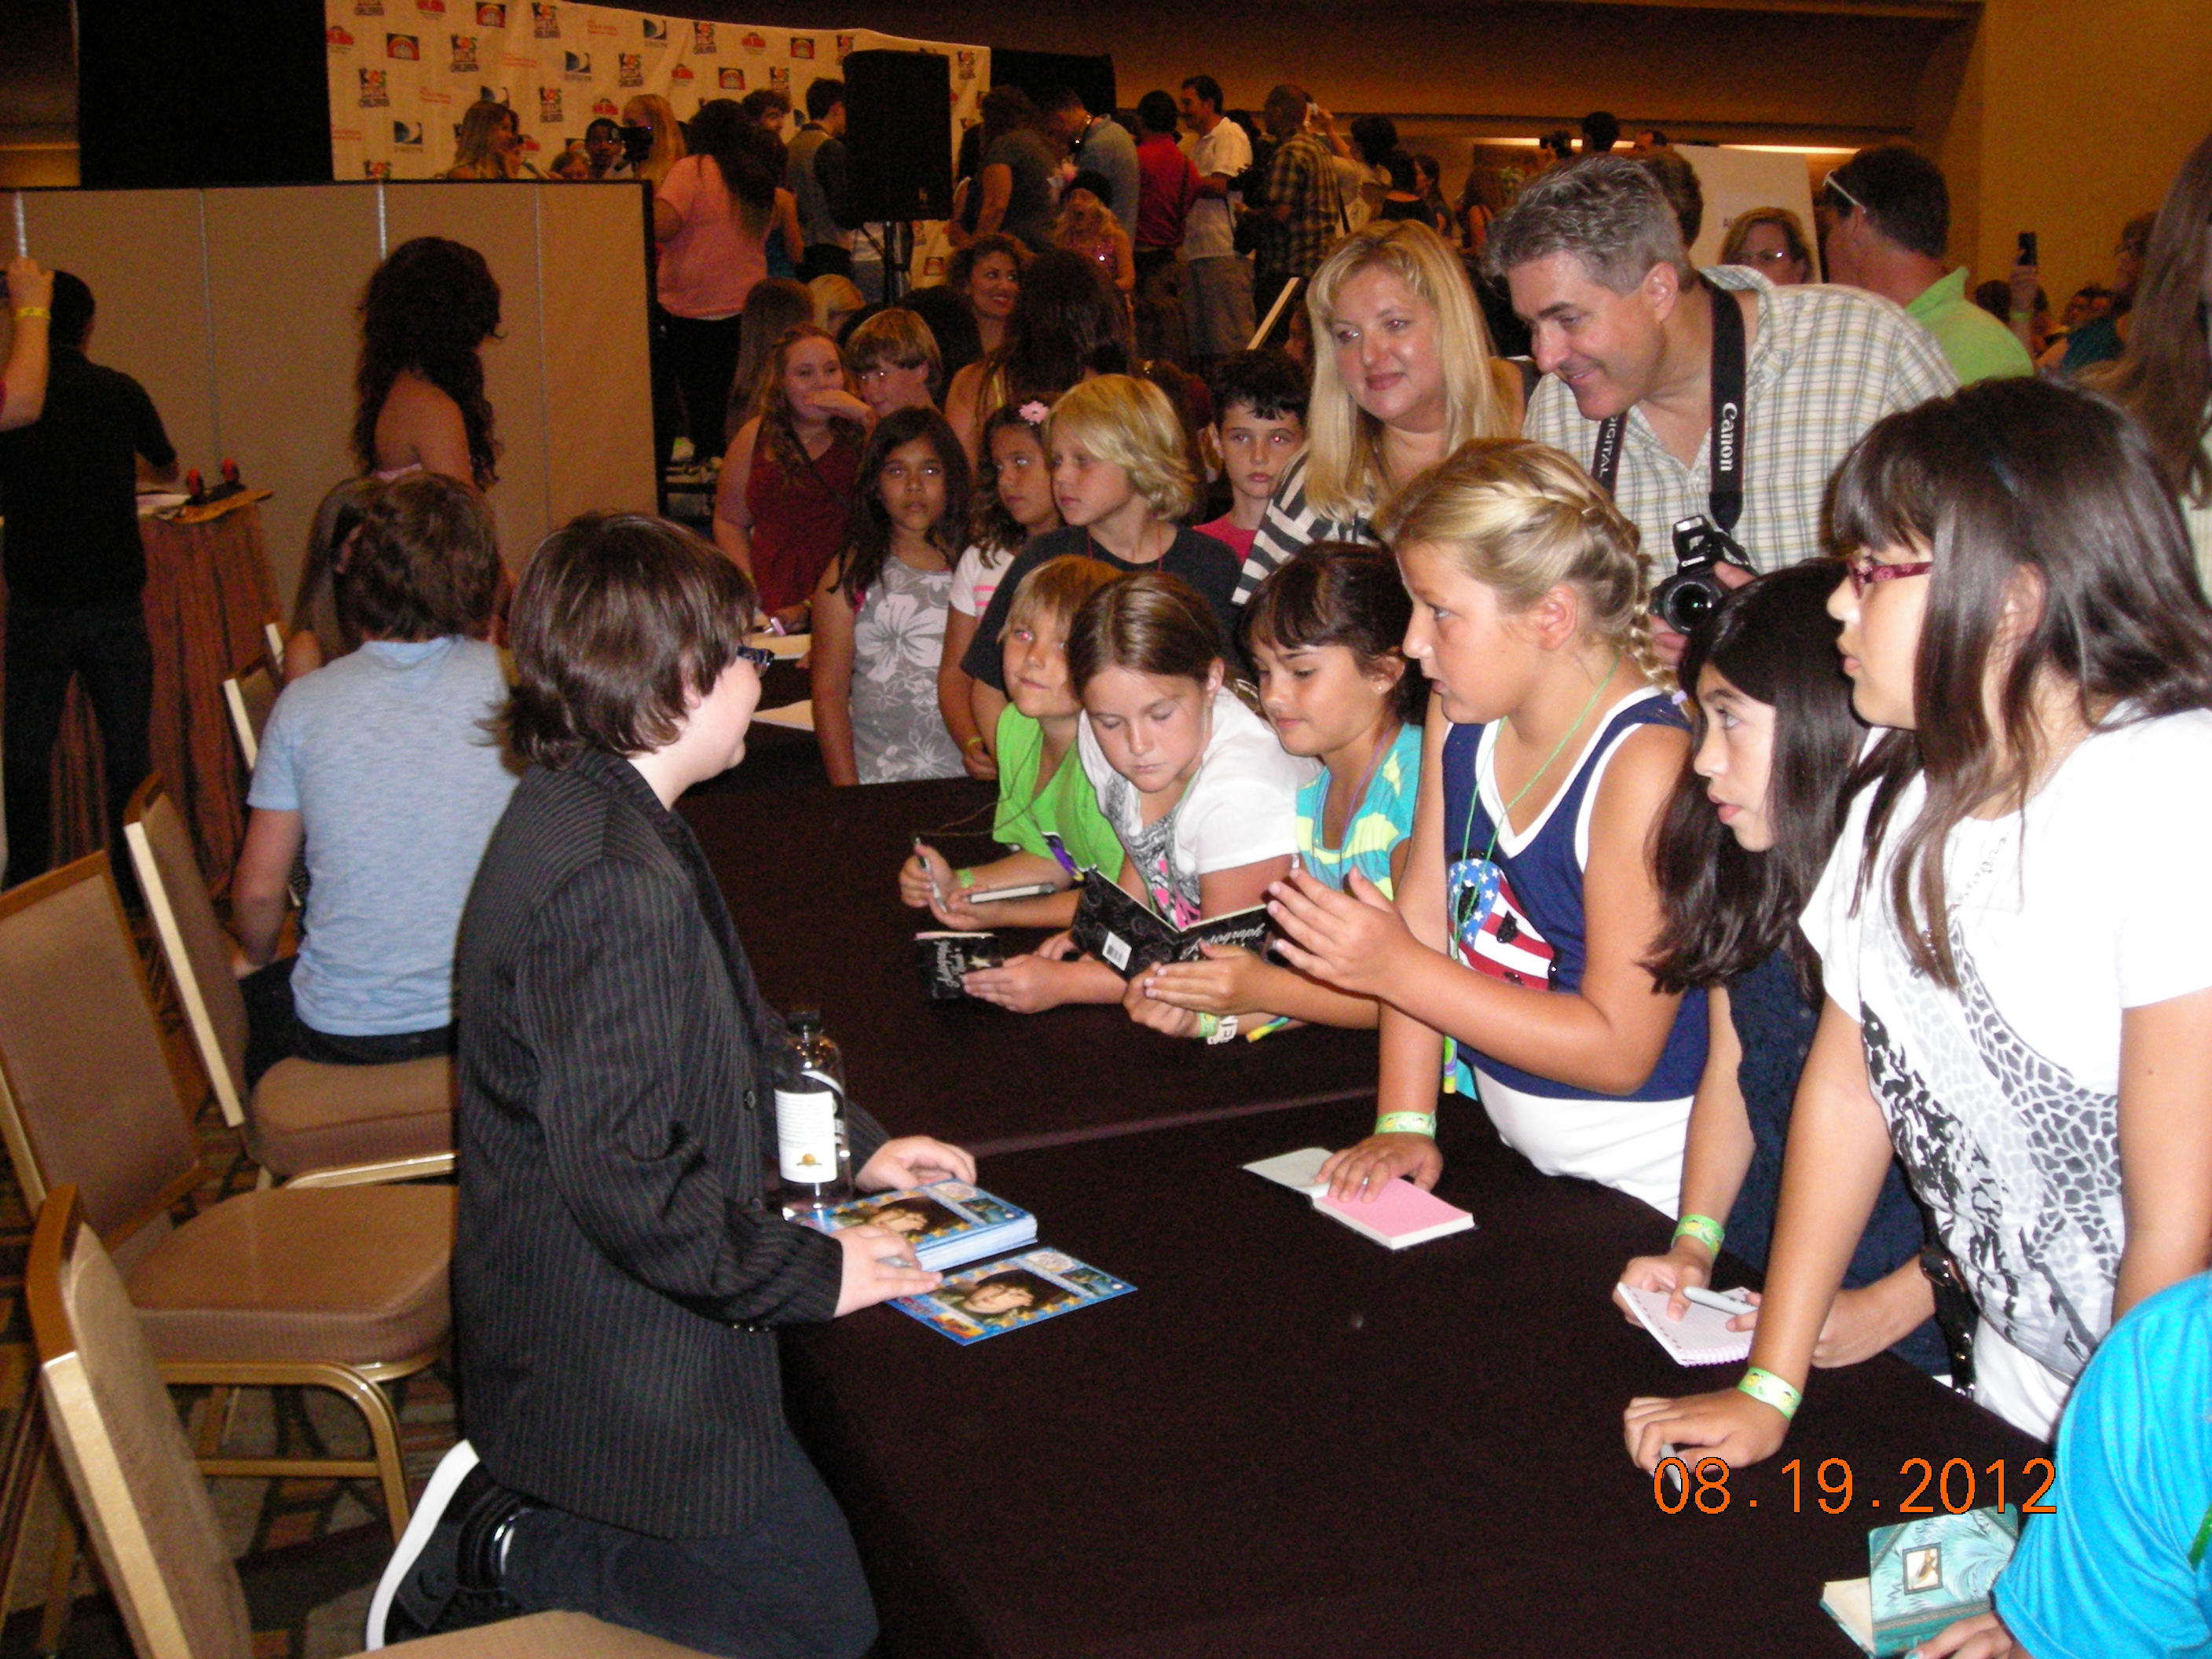 Me signing autographs at the CHOC 2012 Charity Event, in Anaheim, CA, on August 19, 2012. So honored to be an invited celebrity guest of this event, to raise funds for the Children's Hospital of Orange County.